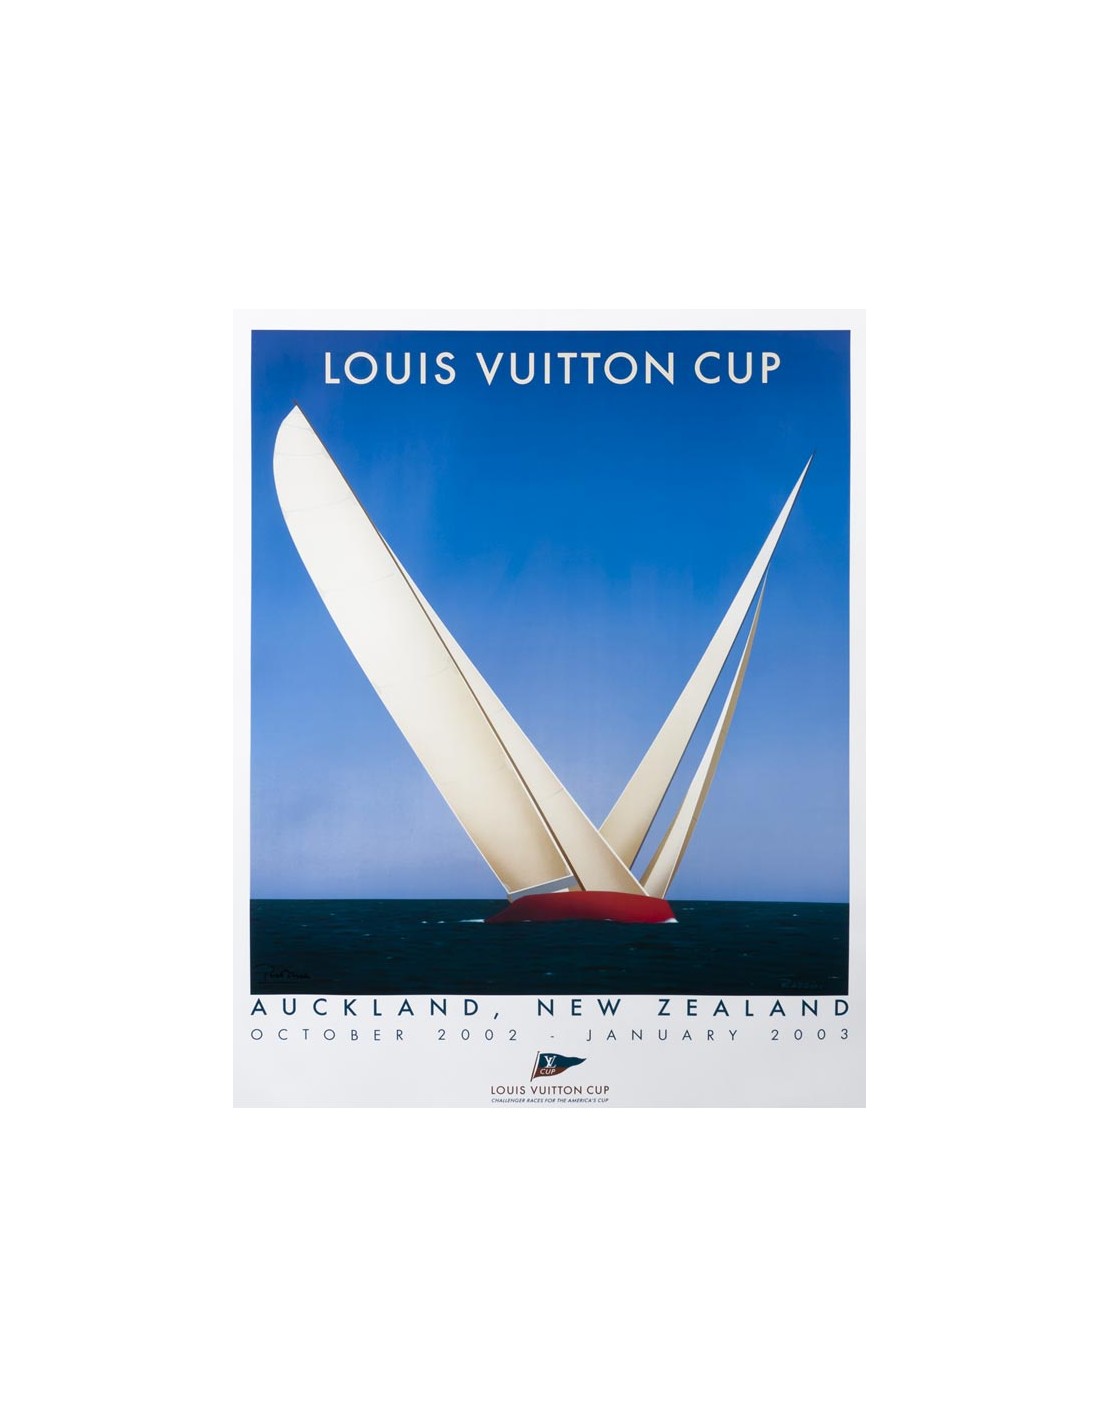 Original Pair Of 1987 Perth Louis Vuitton Cup Framed Posters 21 X 31 #36315